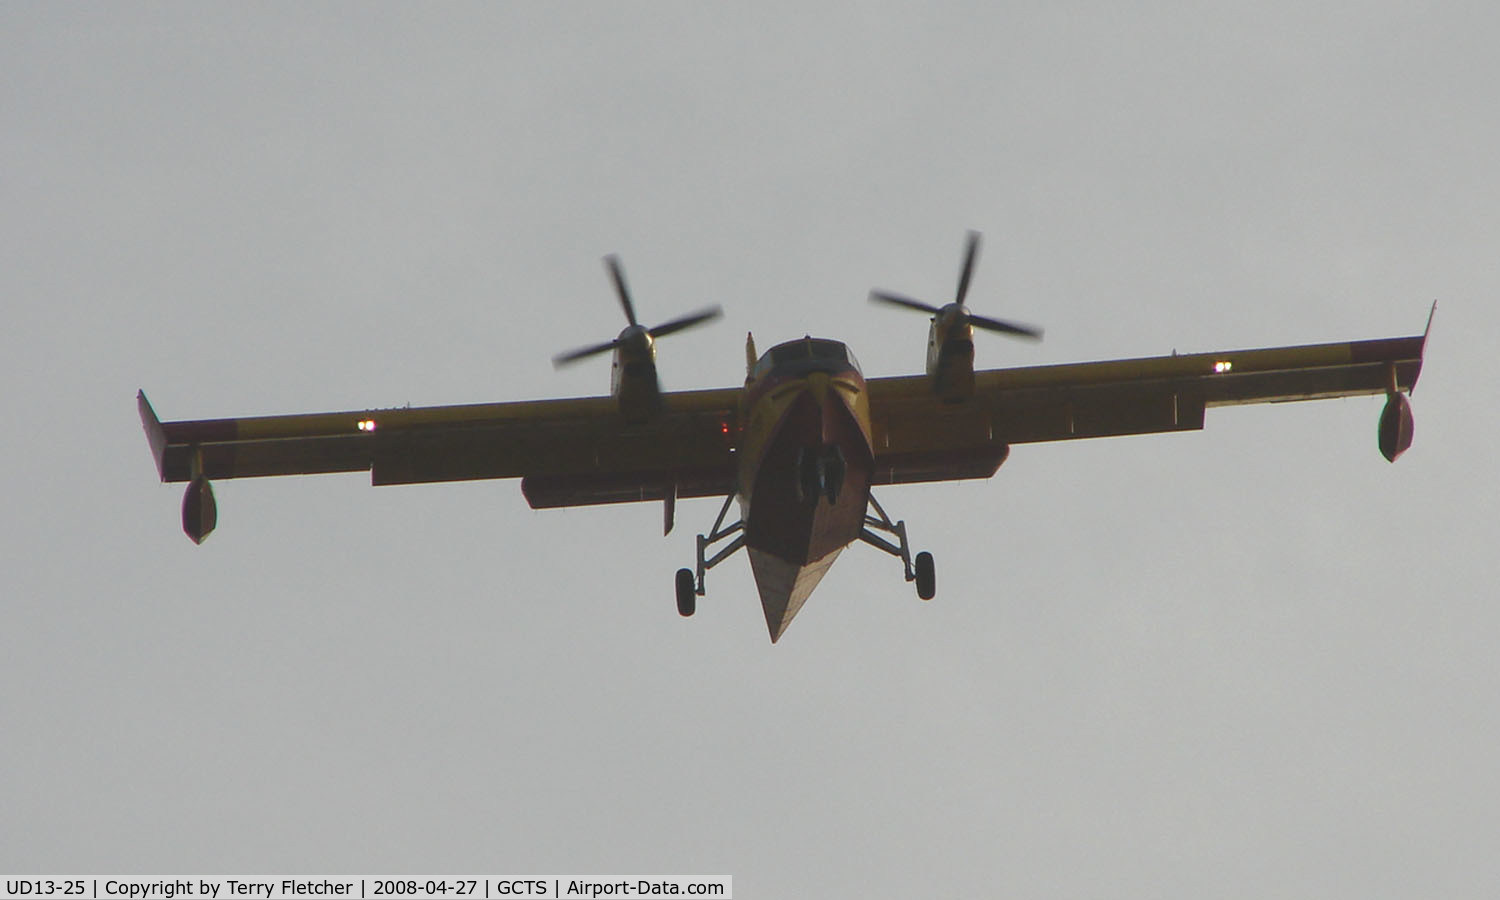 UD13-25, Canadair CL-215T (CL-215-6B11) C/N 1119, Spanish Canadair CL-215T returns to Tenerife South just before nightfall